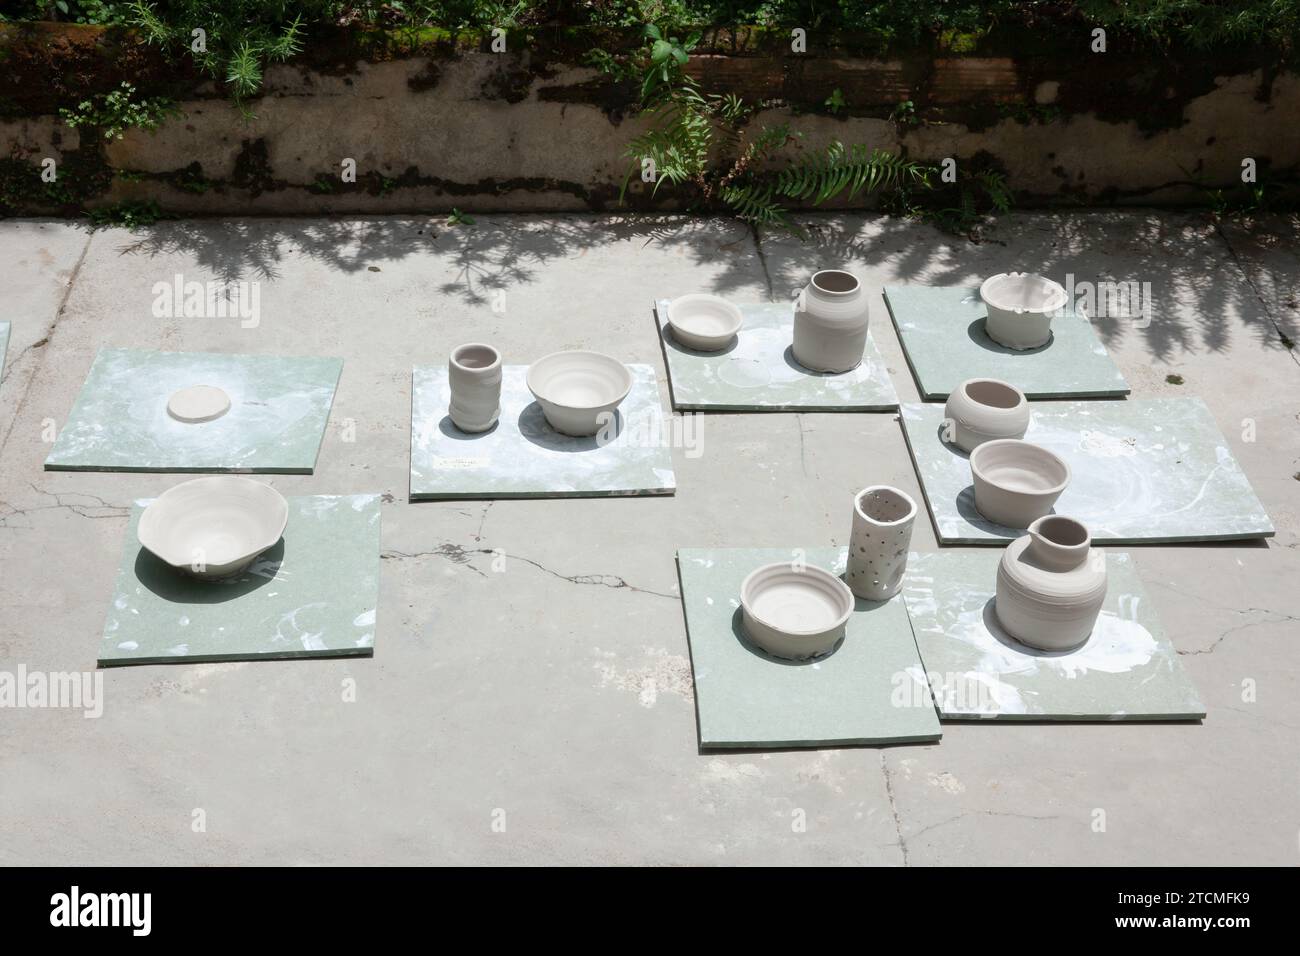 A group of white pottery crafts are drying in the sunny garden Stock Photo